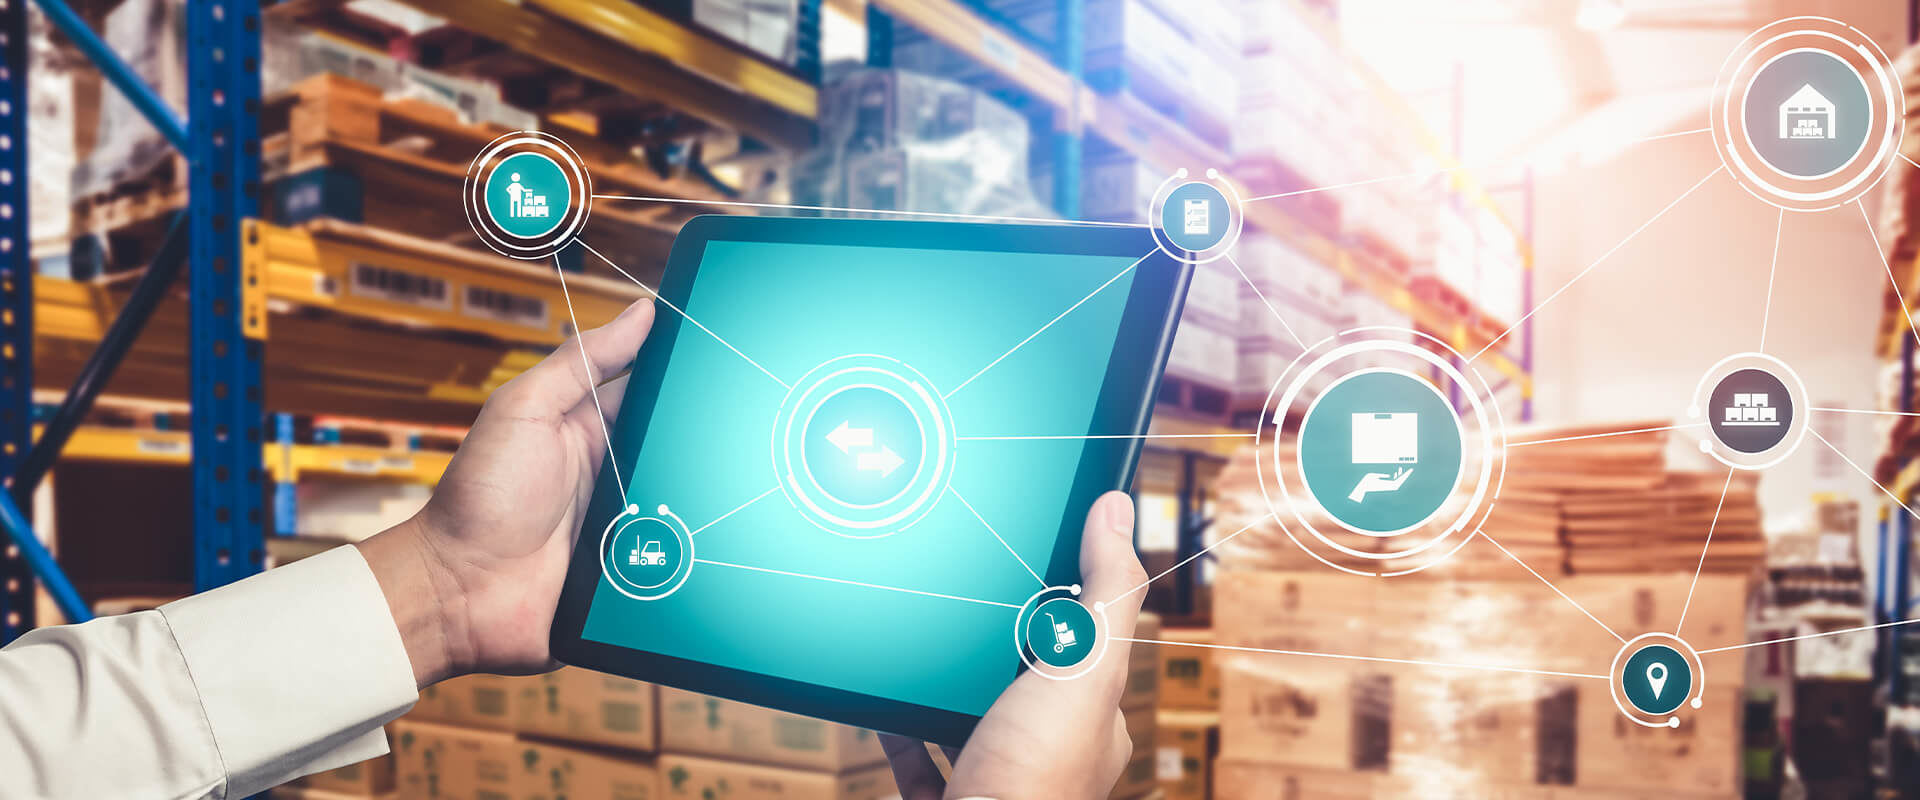 Optimizing Inventory and Supply Chain Management Systems